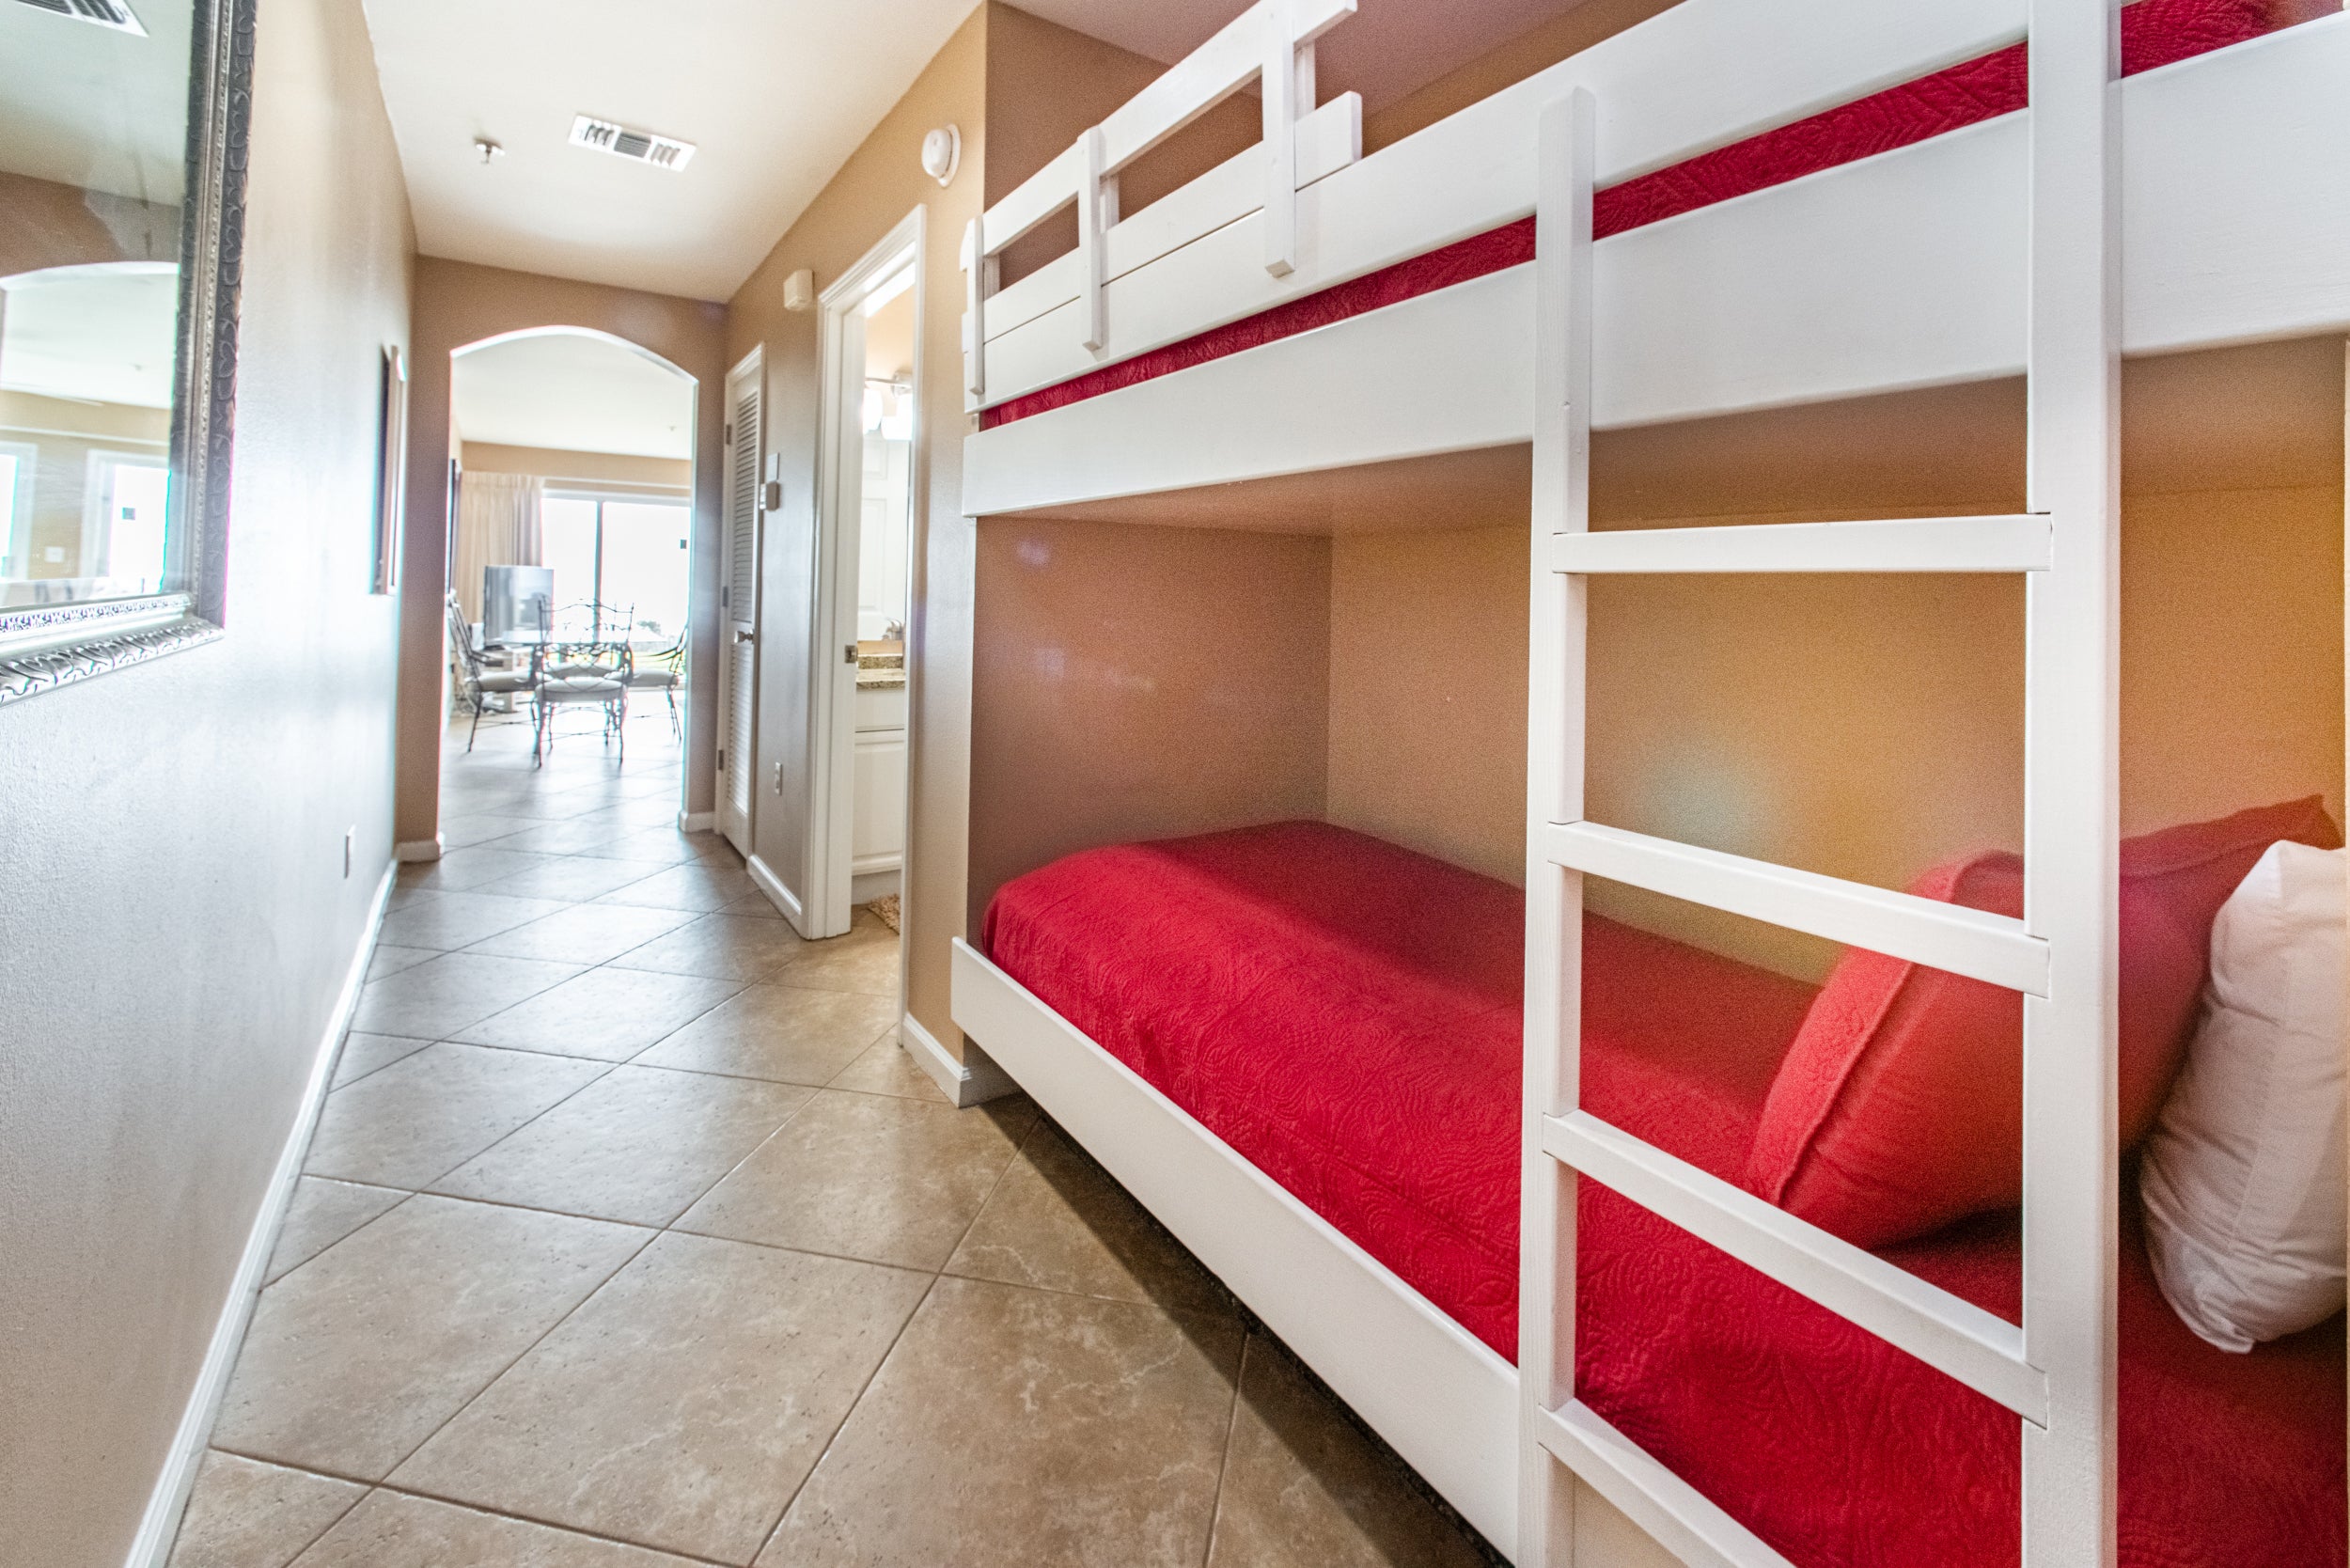 Twin over twin bunk beds